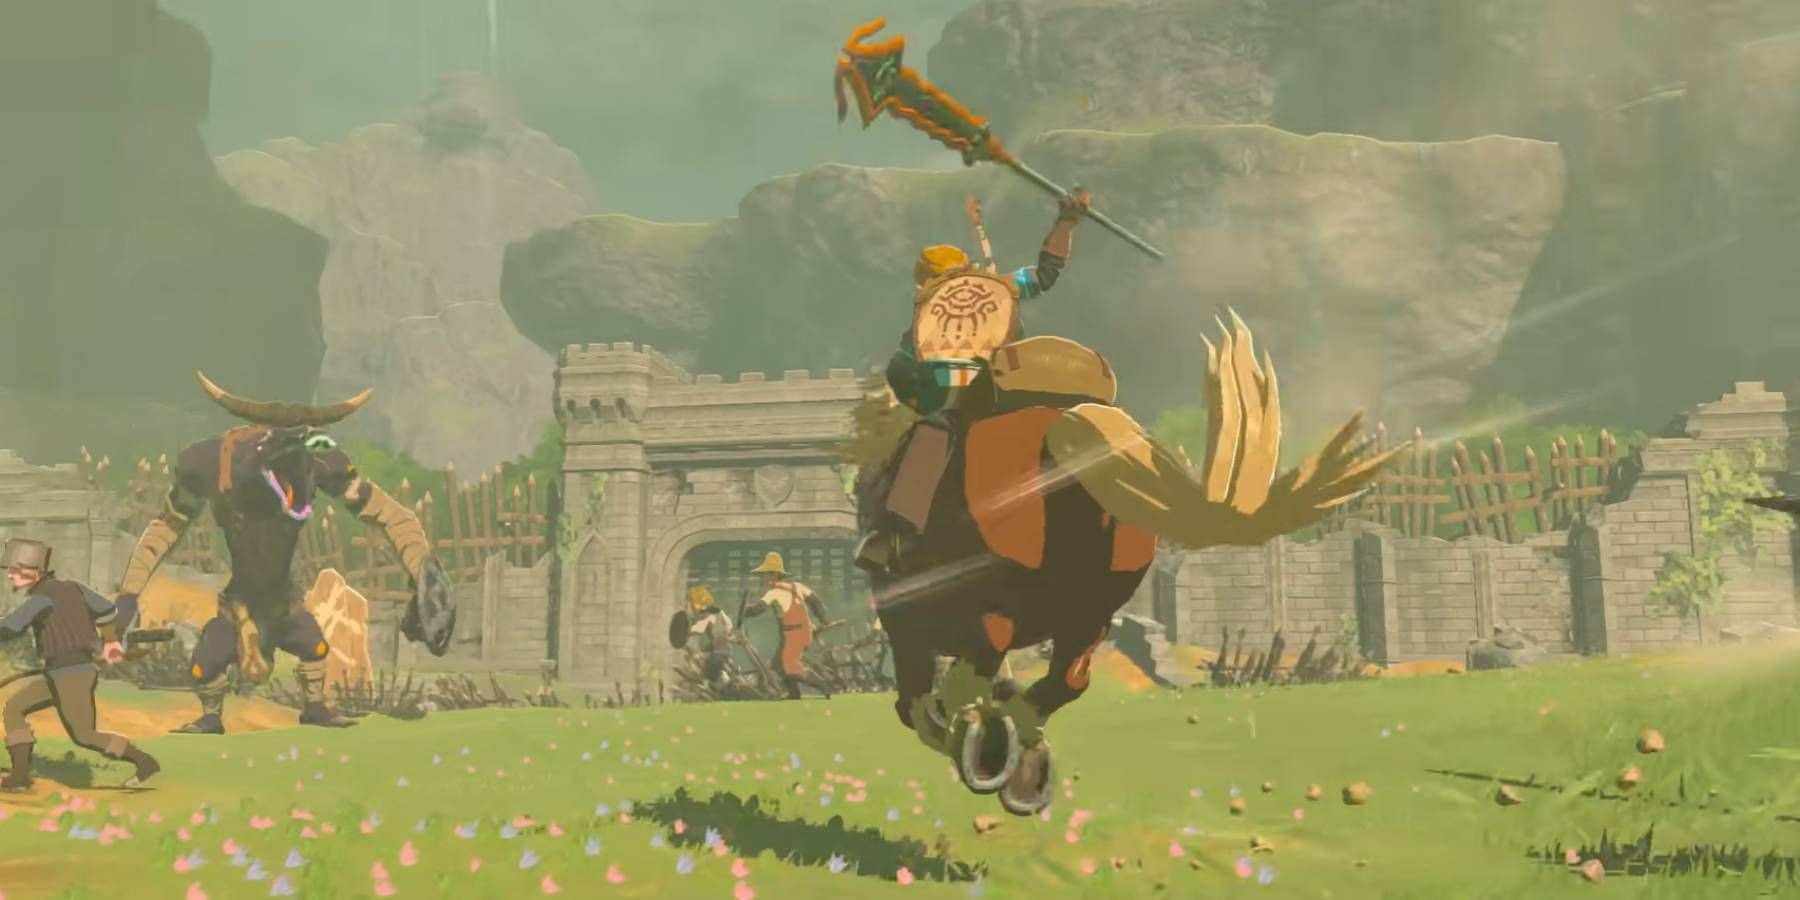 Link charging to help some villagers in battle in The Legend of Zelda: Tears of the Kingdom